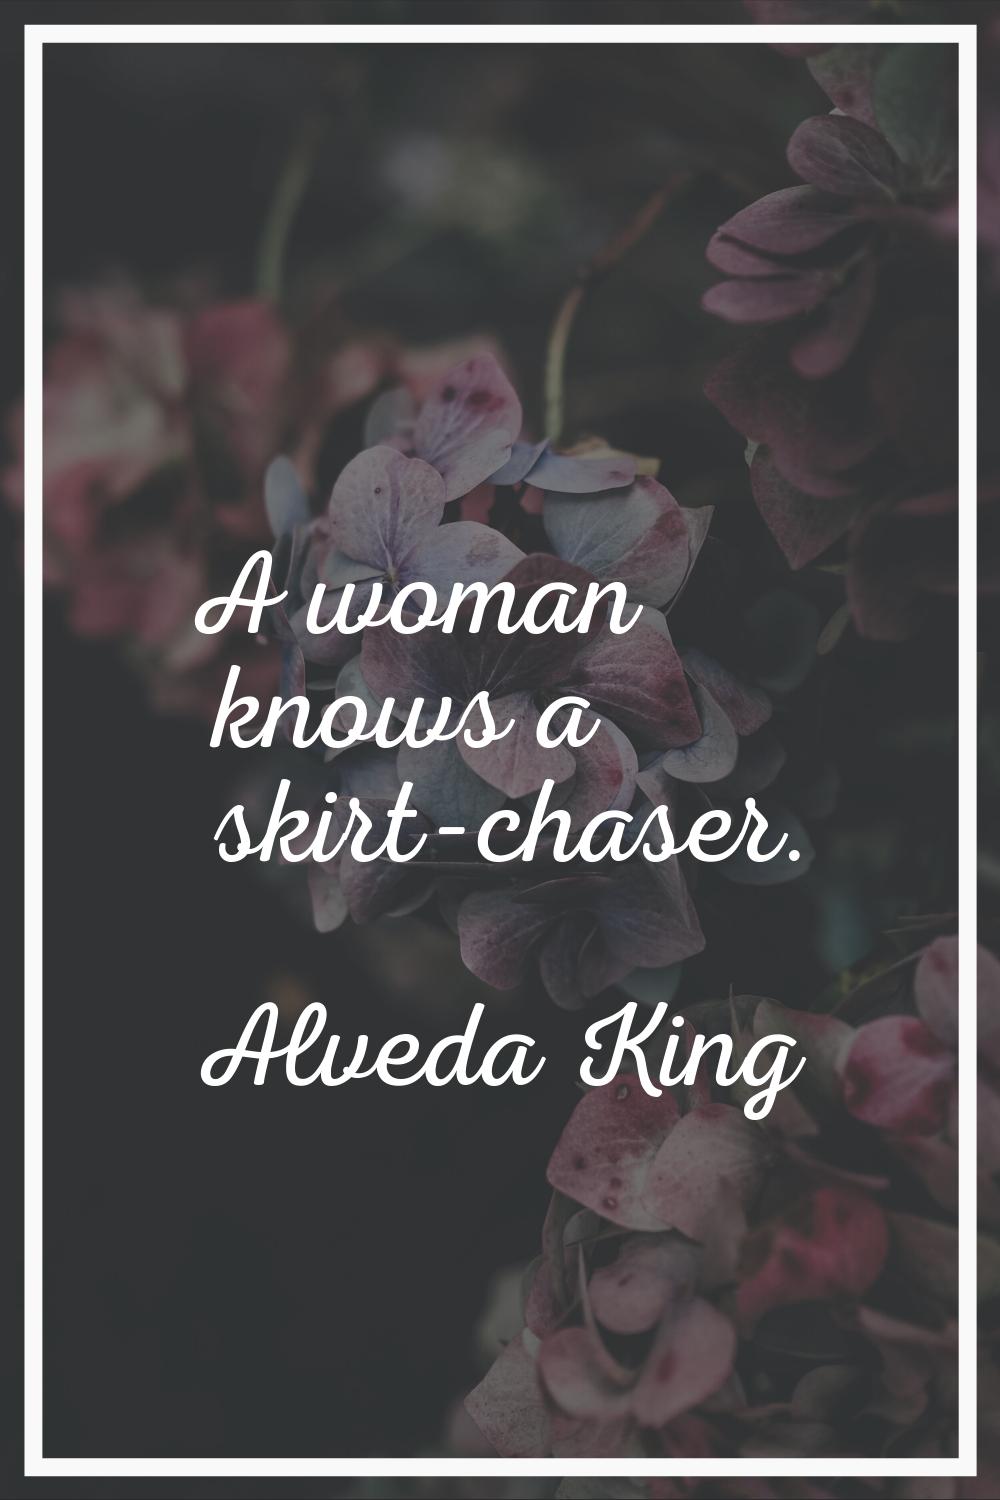 A woman knows a skirt-chaser.